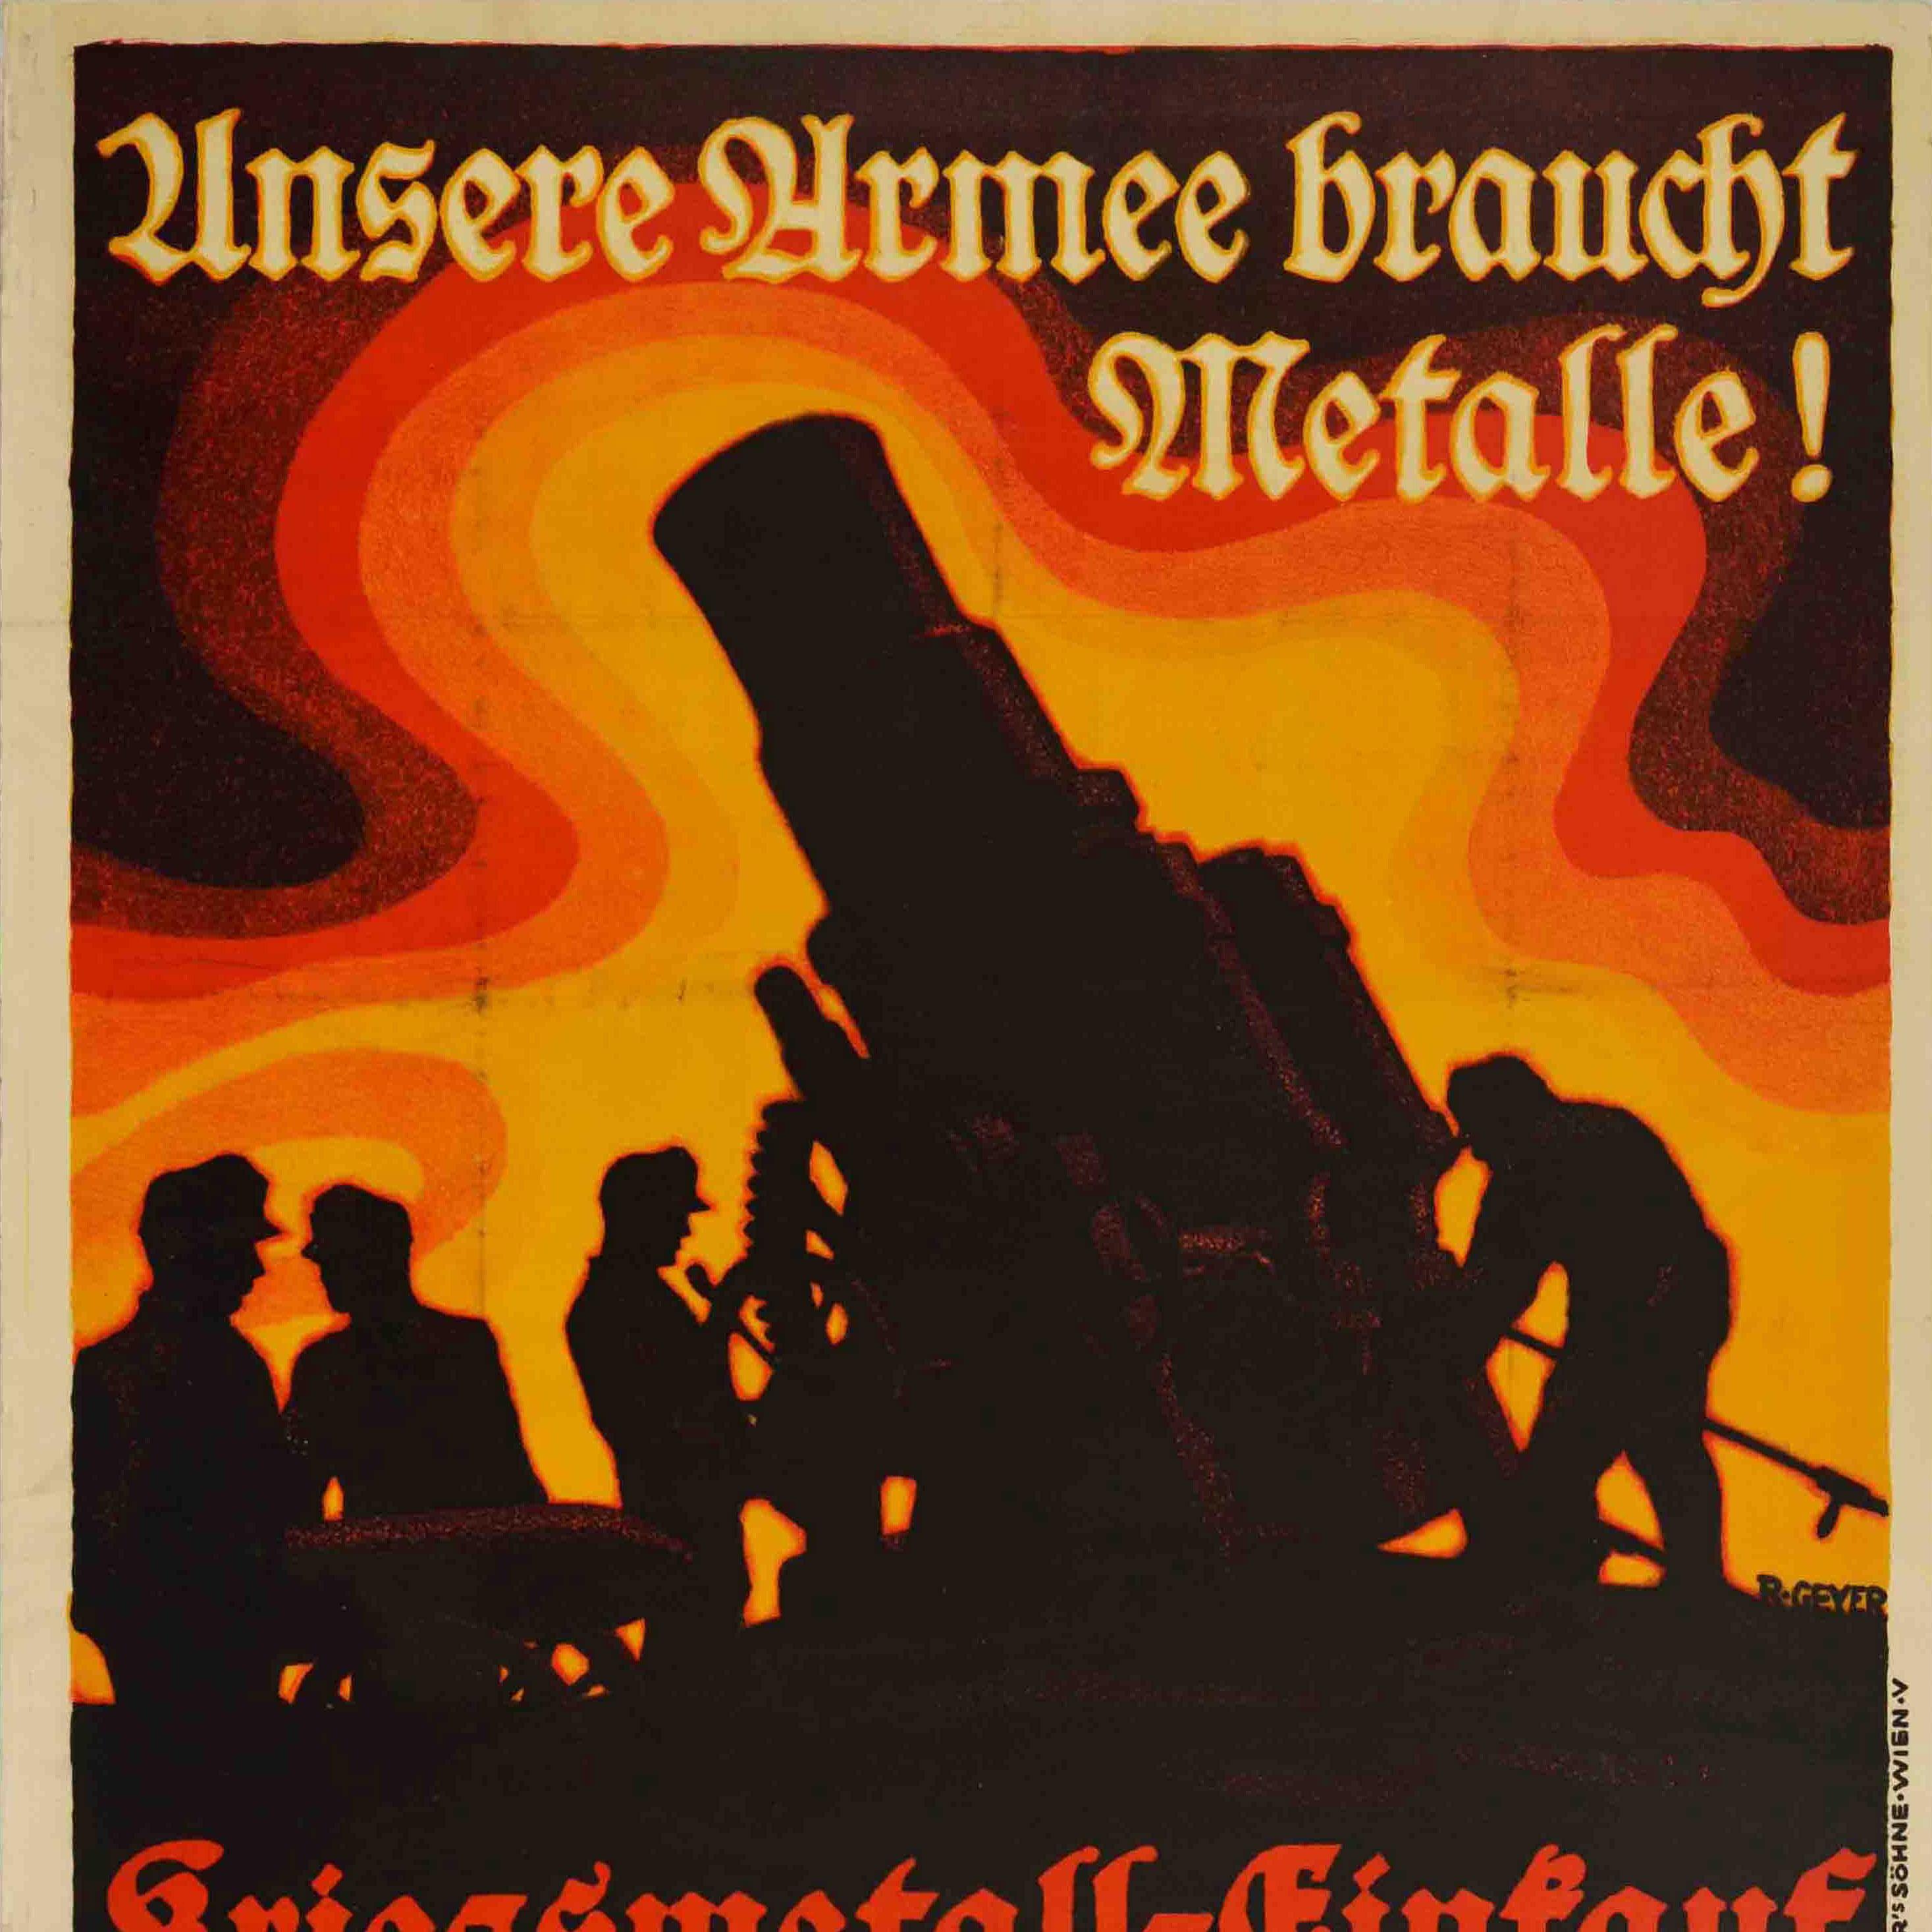 Original antique World War One poster featuring a dynamic design depicting soldiers manning military weapons in front of an explosive yellow, orange, red and black shaded background, the stylised text reading - Our army needs metals! Kriegsmetall